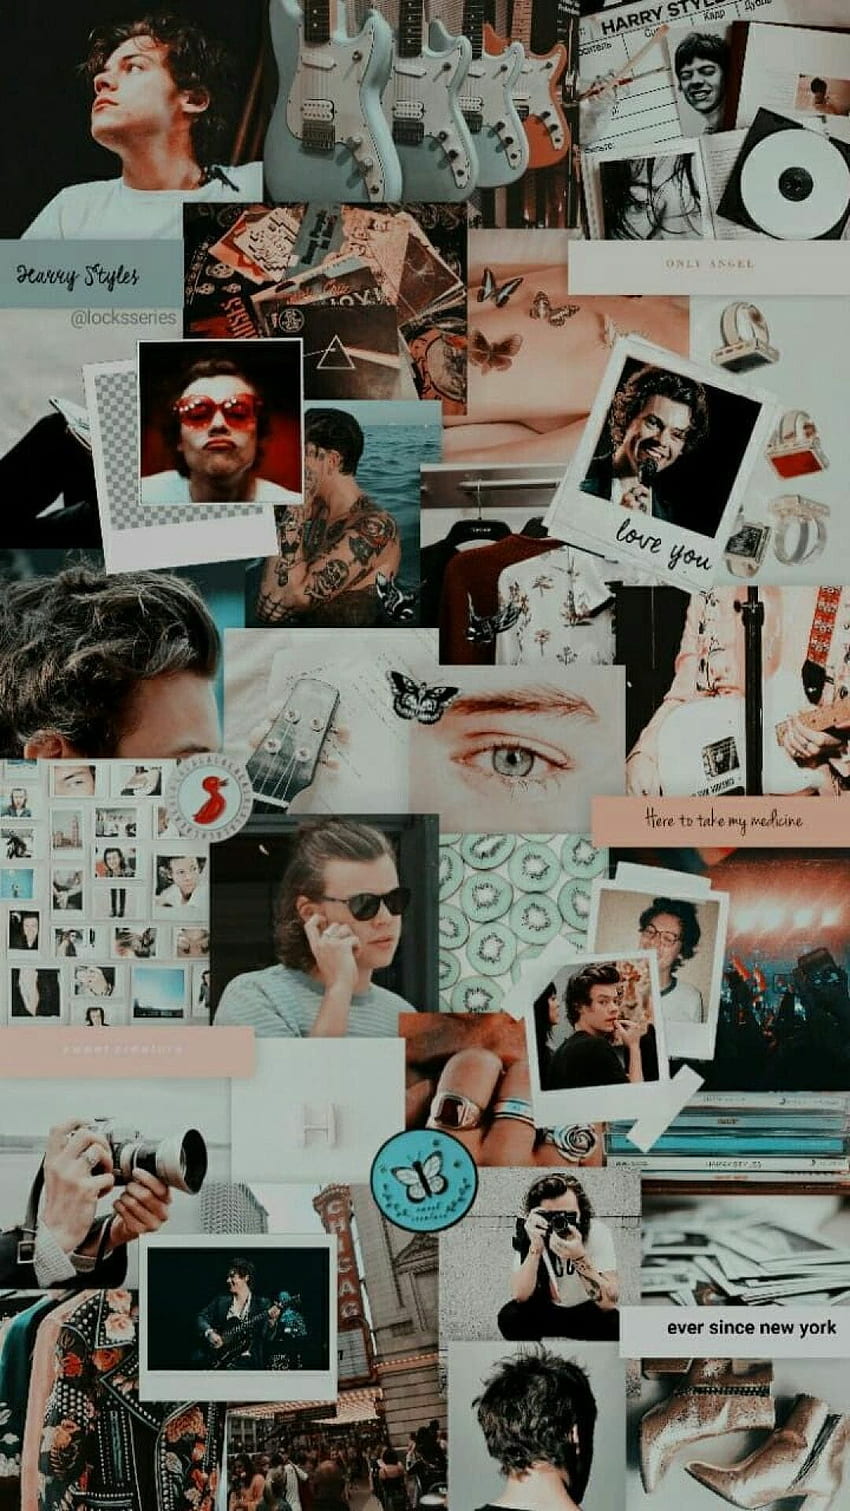 Buy Harry Styles Aesthetic Wallpaper Collage Online in India  Etsy